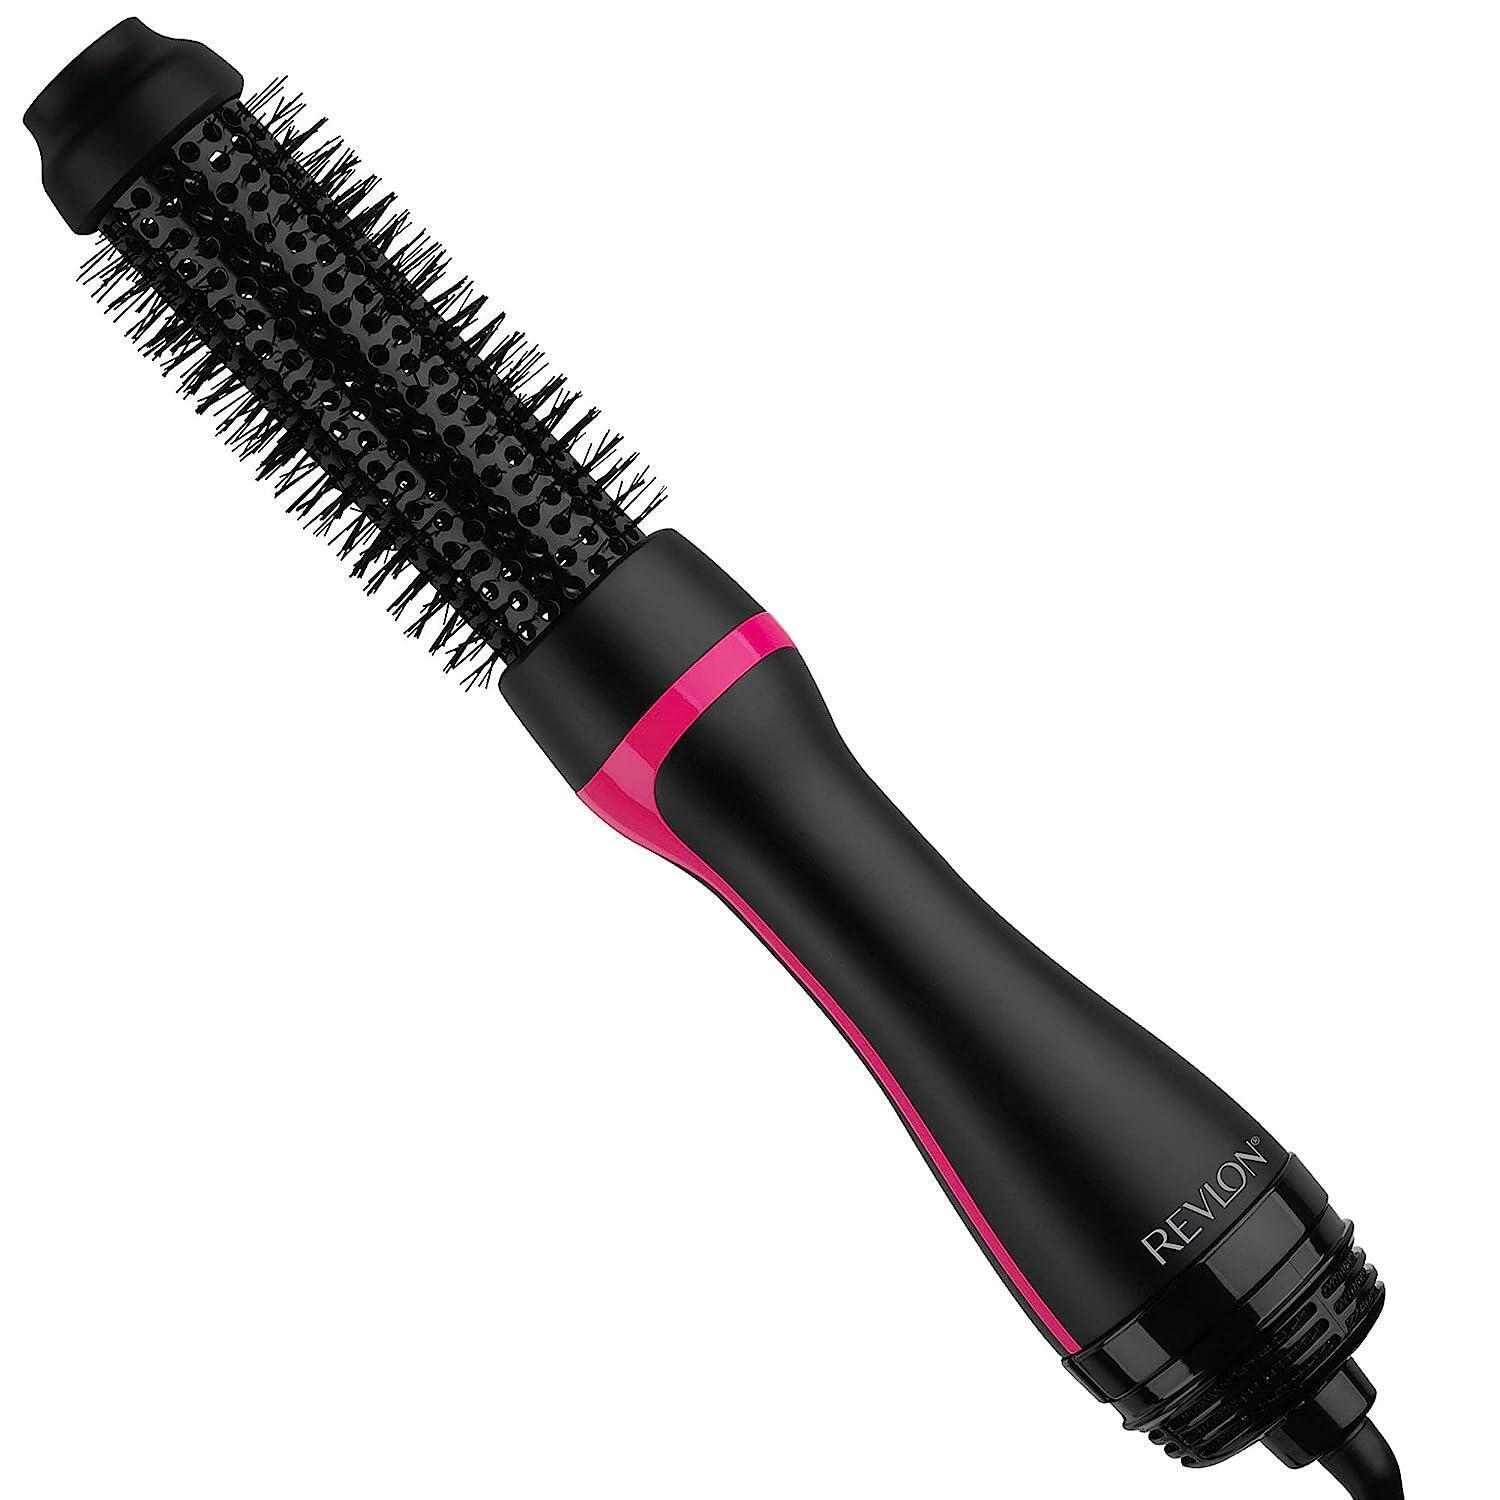 REVLON One Step 1-1/2in Root Booster Round Brush Dryer, Hair Styler - BLACK/PINK - Open Box